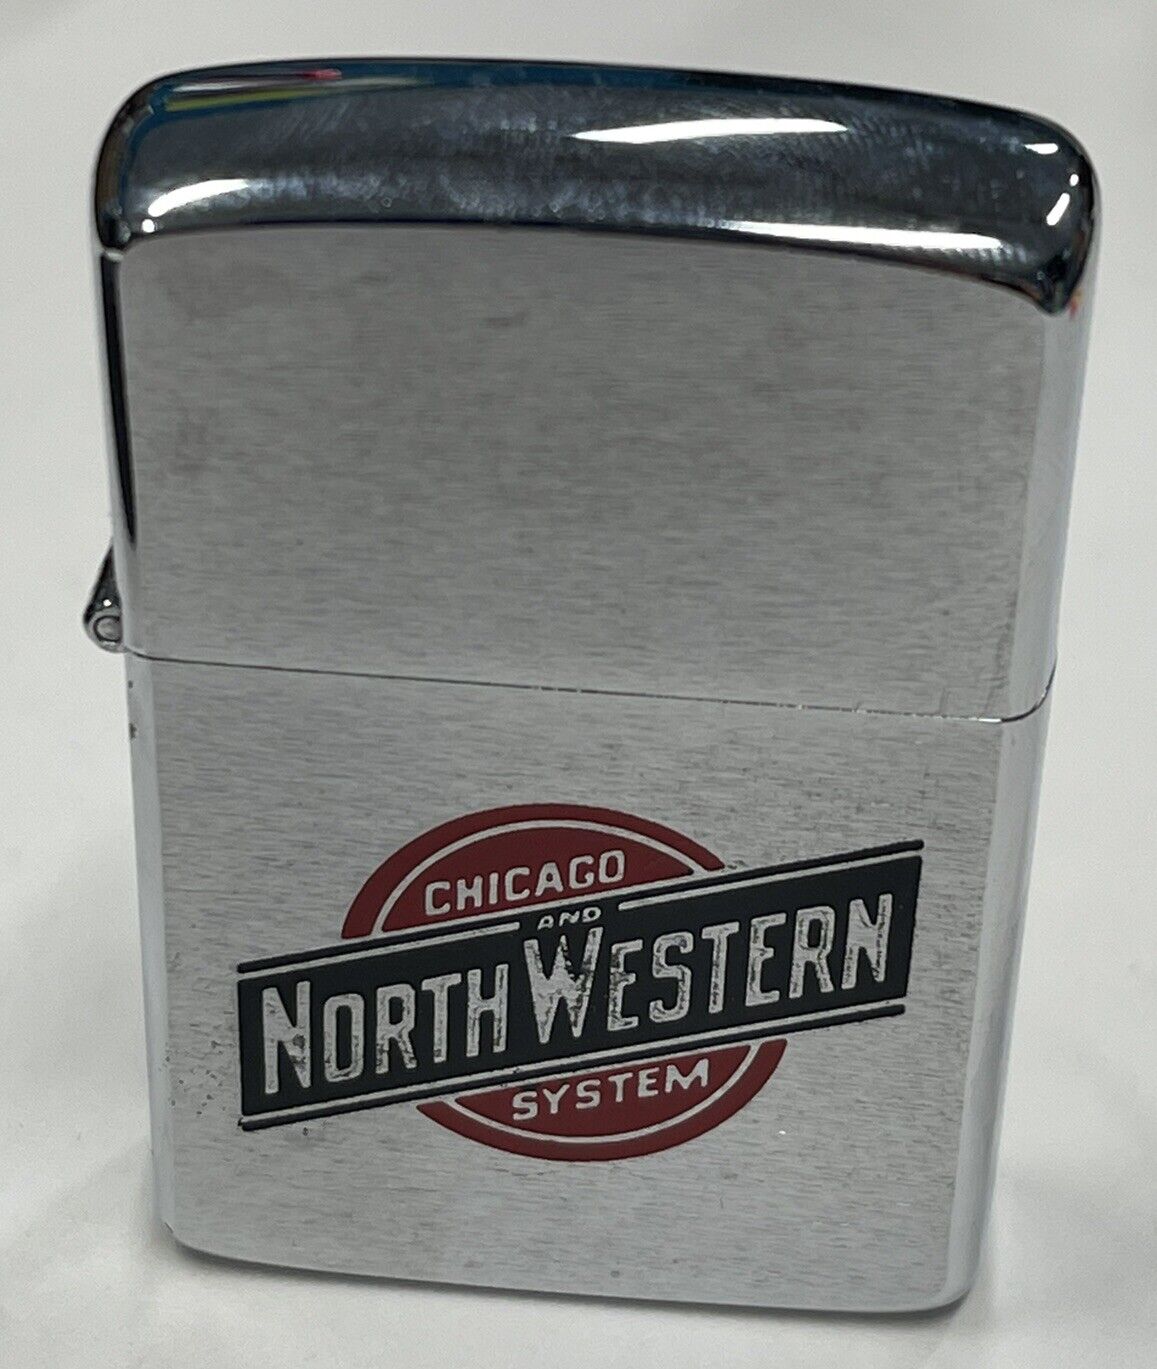 ZIPPO 1988 NORTH WESTERN CHICAGO RAILROAD SYSTEM LIGHTER UNFIRED IN BOX 79S